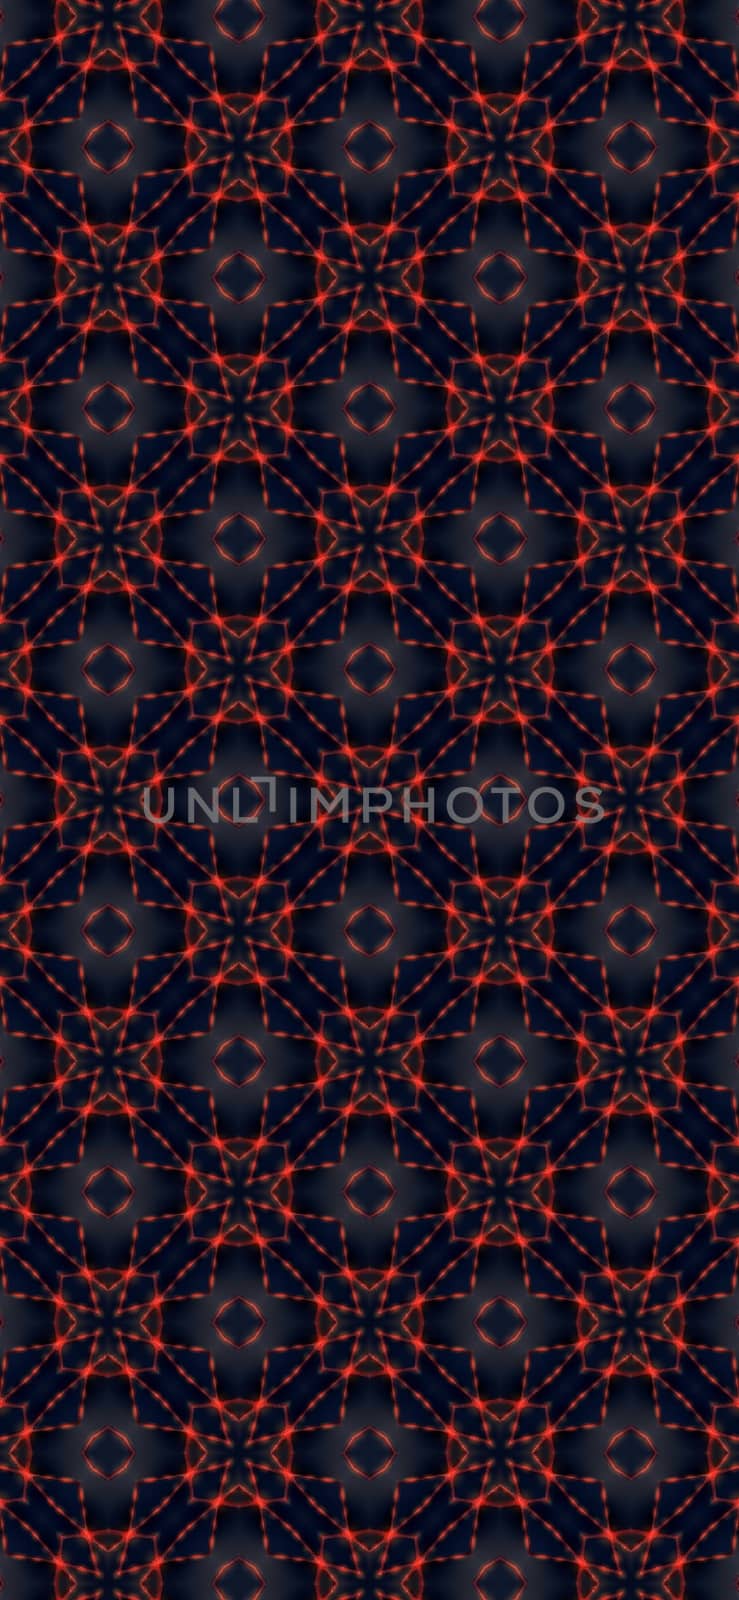 Repetitive geometric pattern.  Abstract wallpaper.